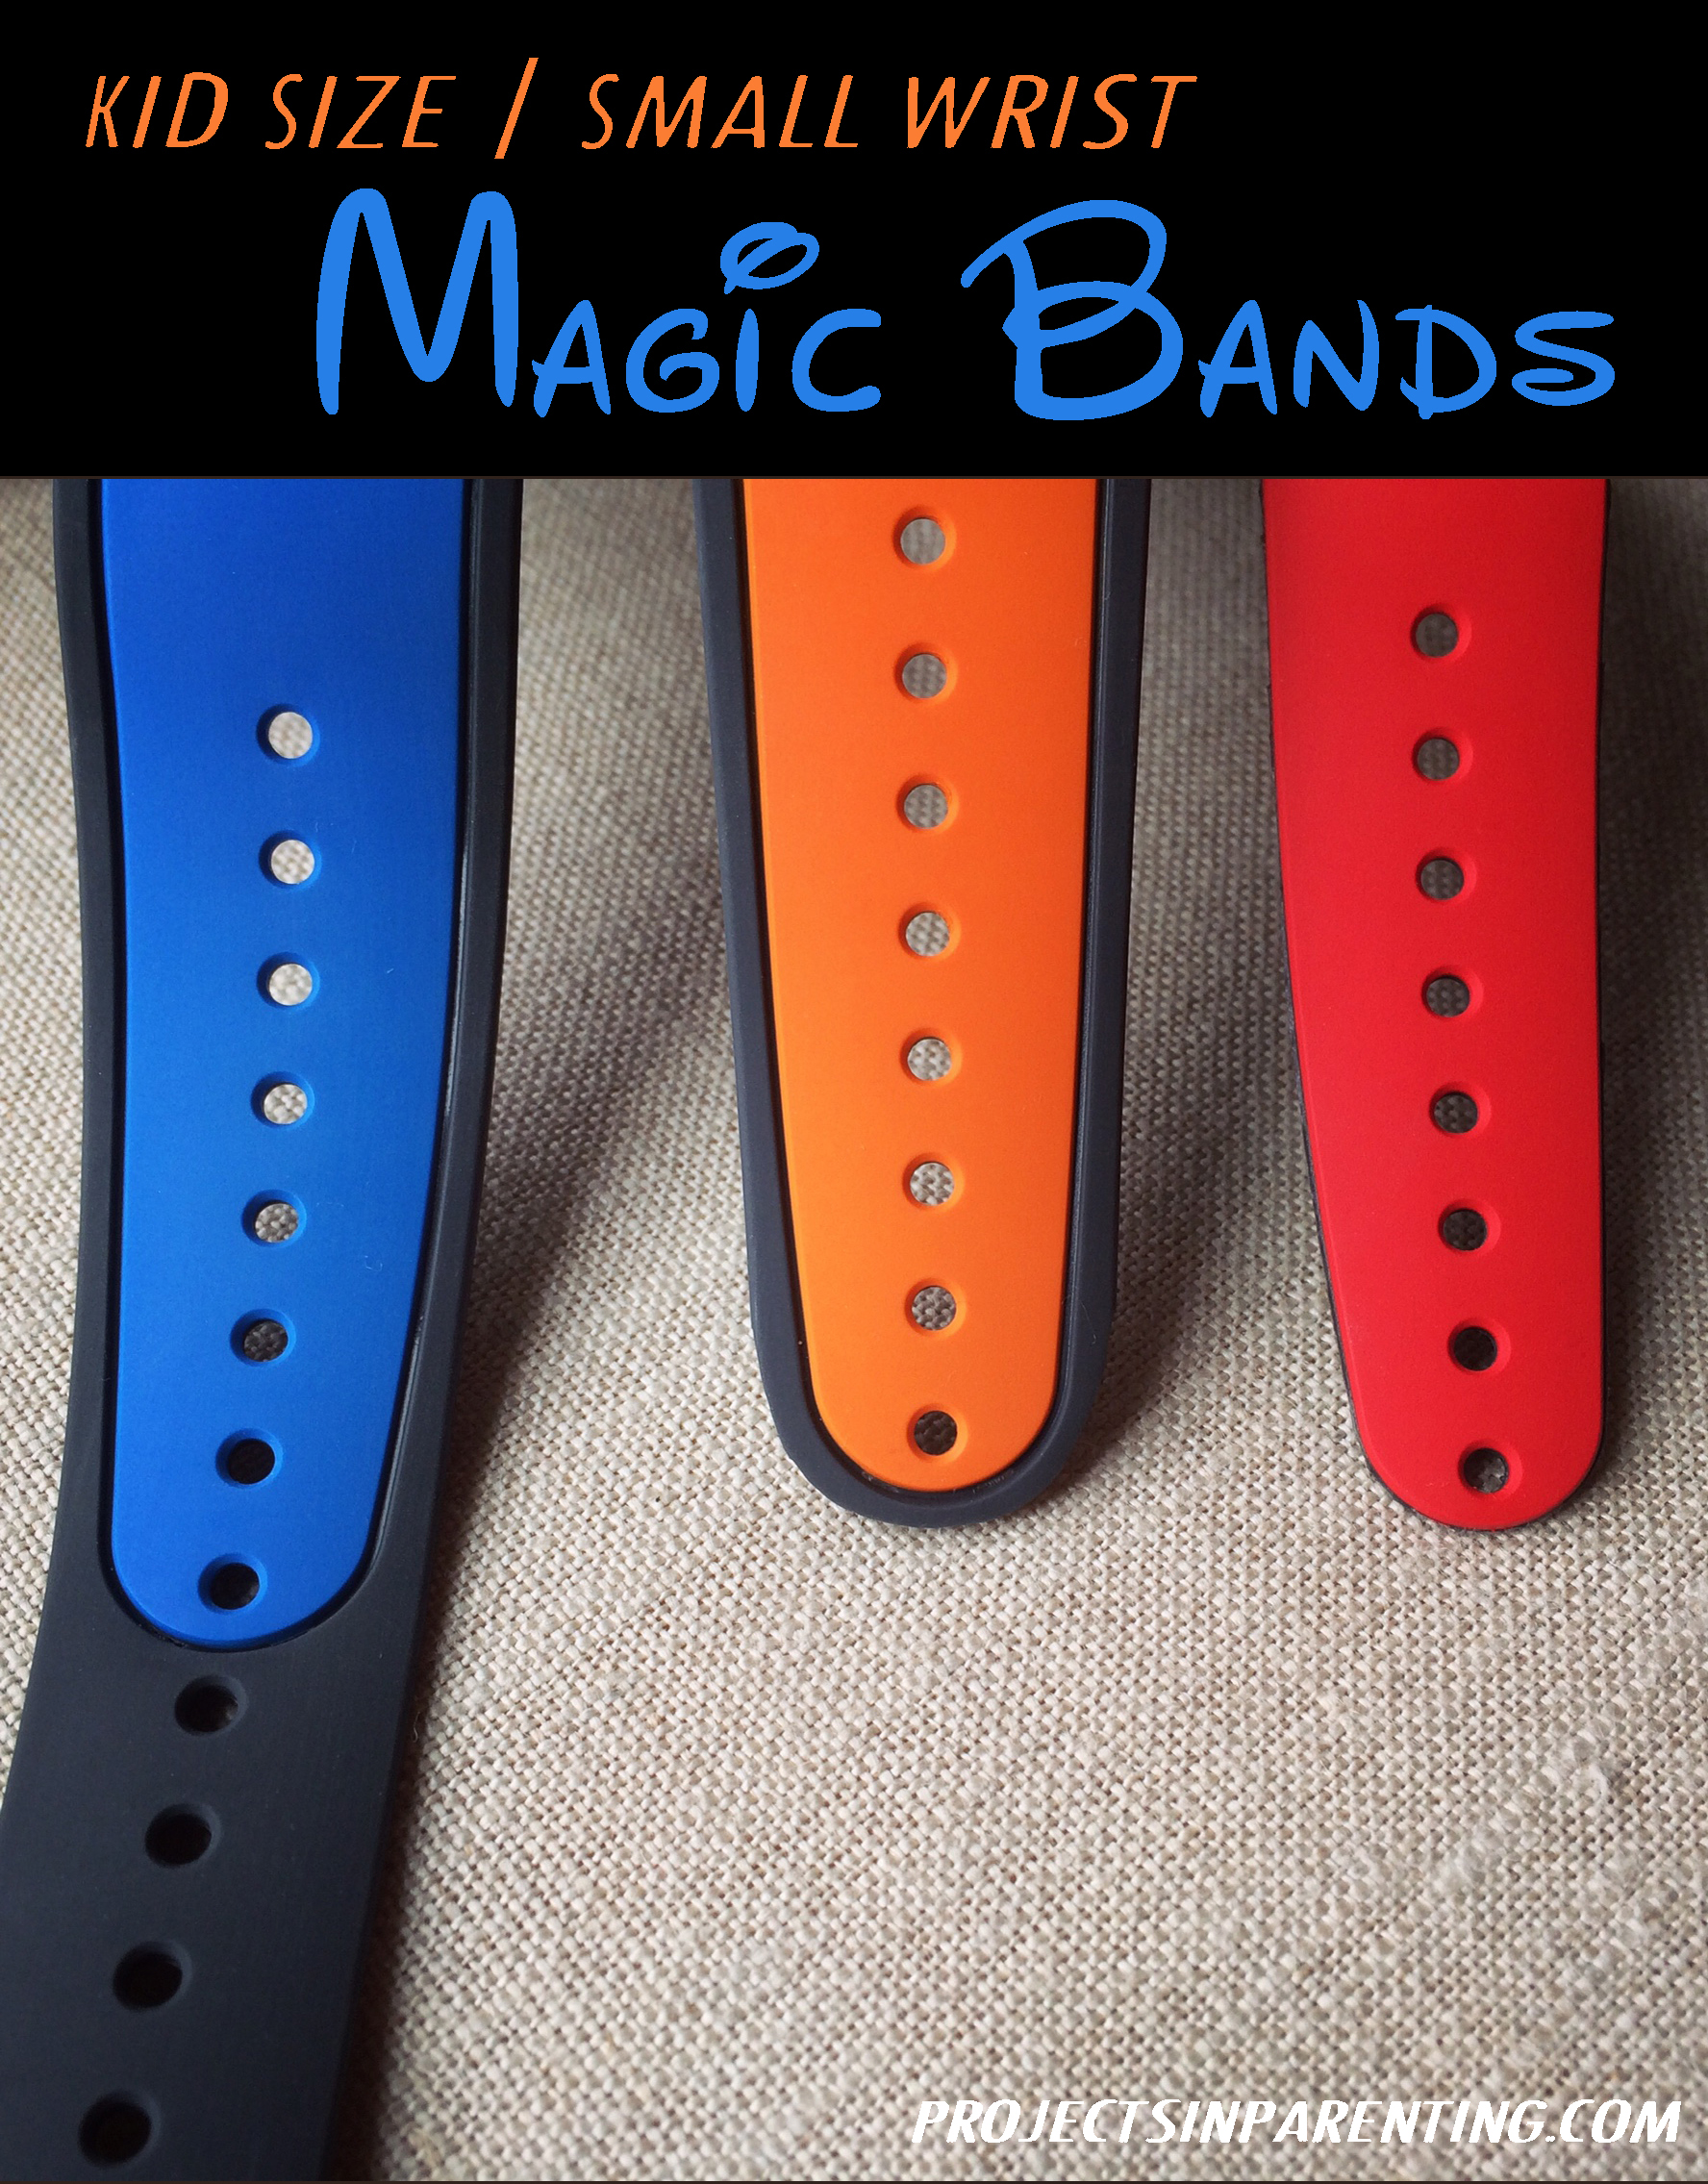 Kid Size or Small Wrist Magic Bands